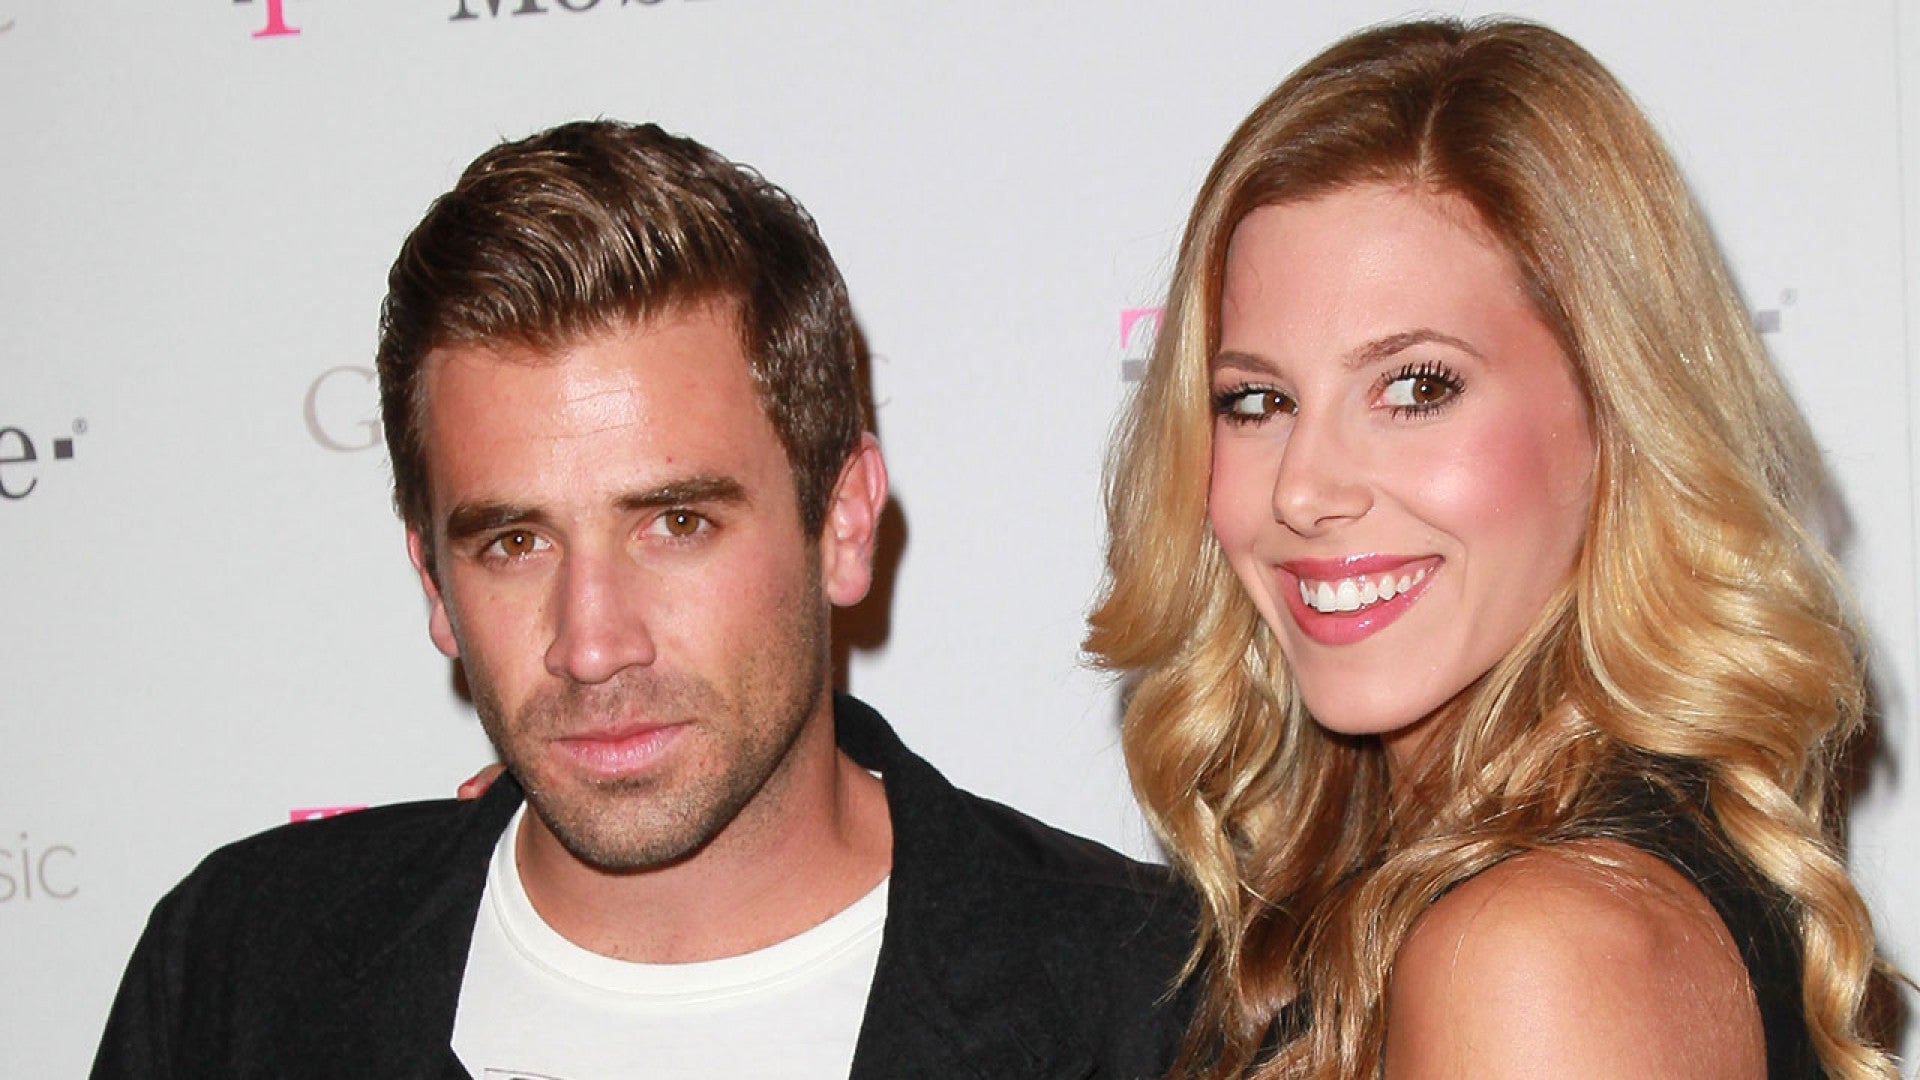 Lauren Conrad's The Hills' ex Jason Wahler is expecting his first